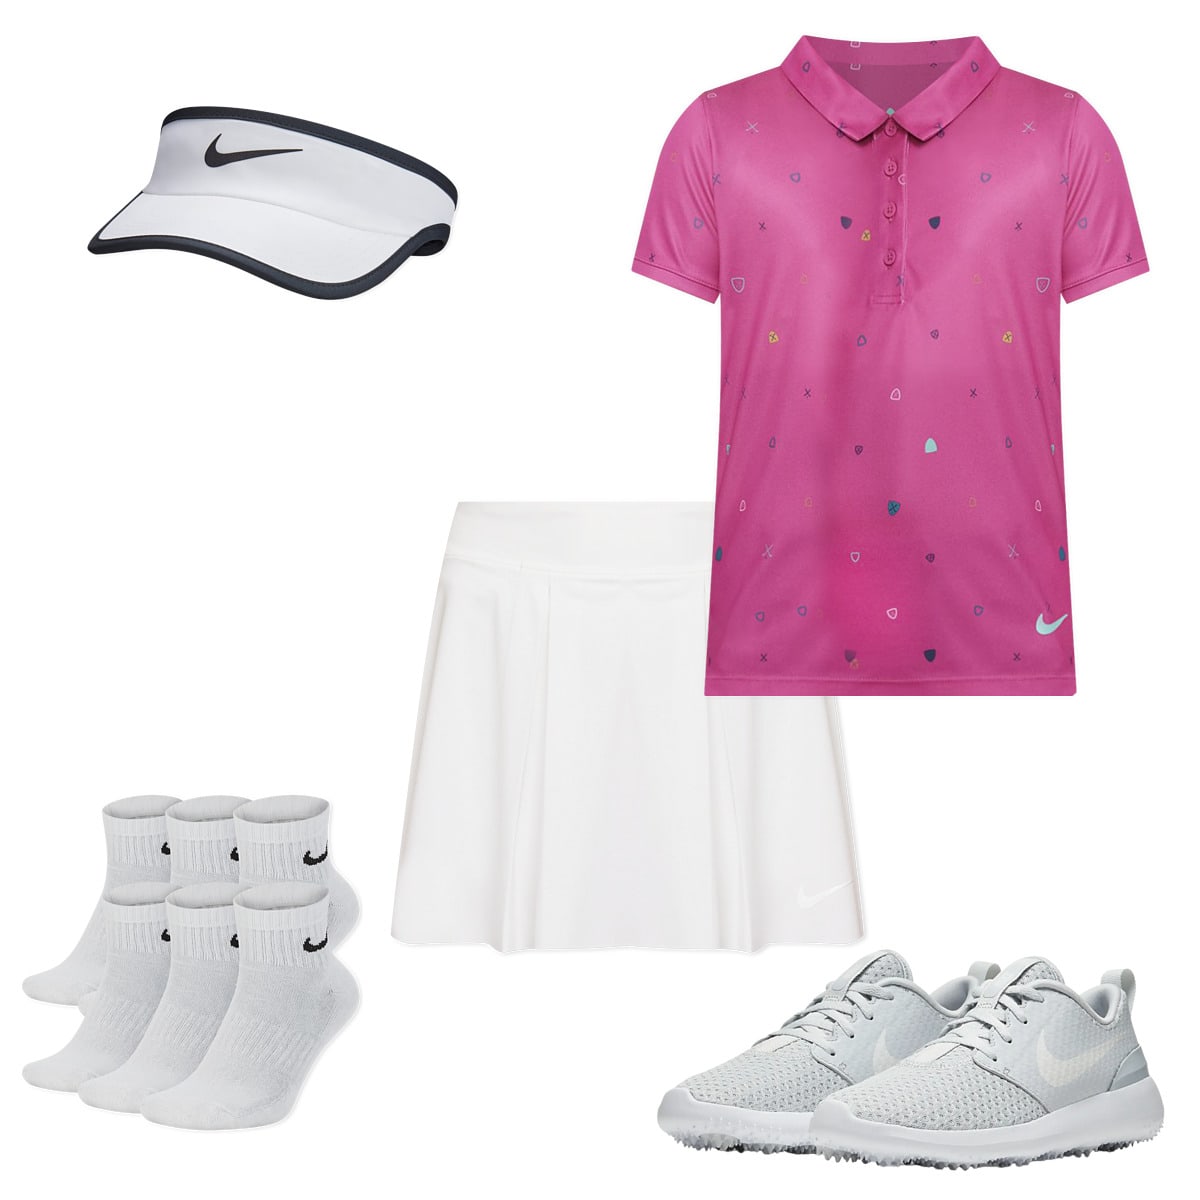 Pros and cons of the golf dress